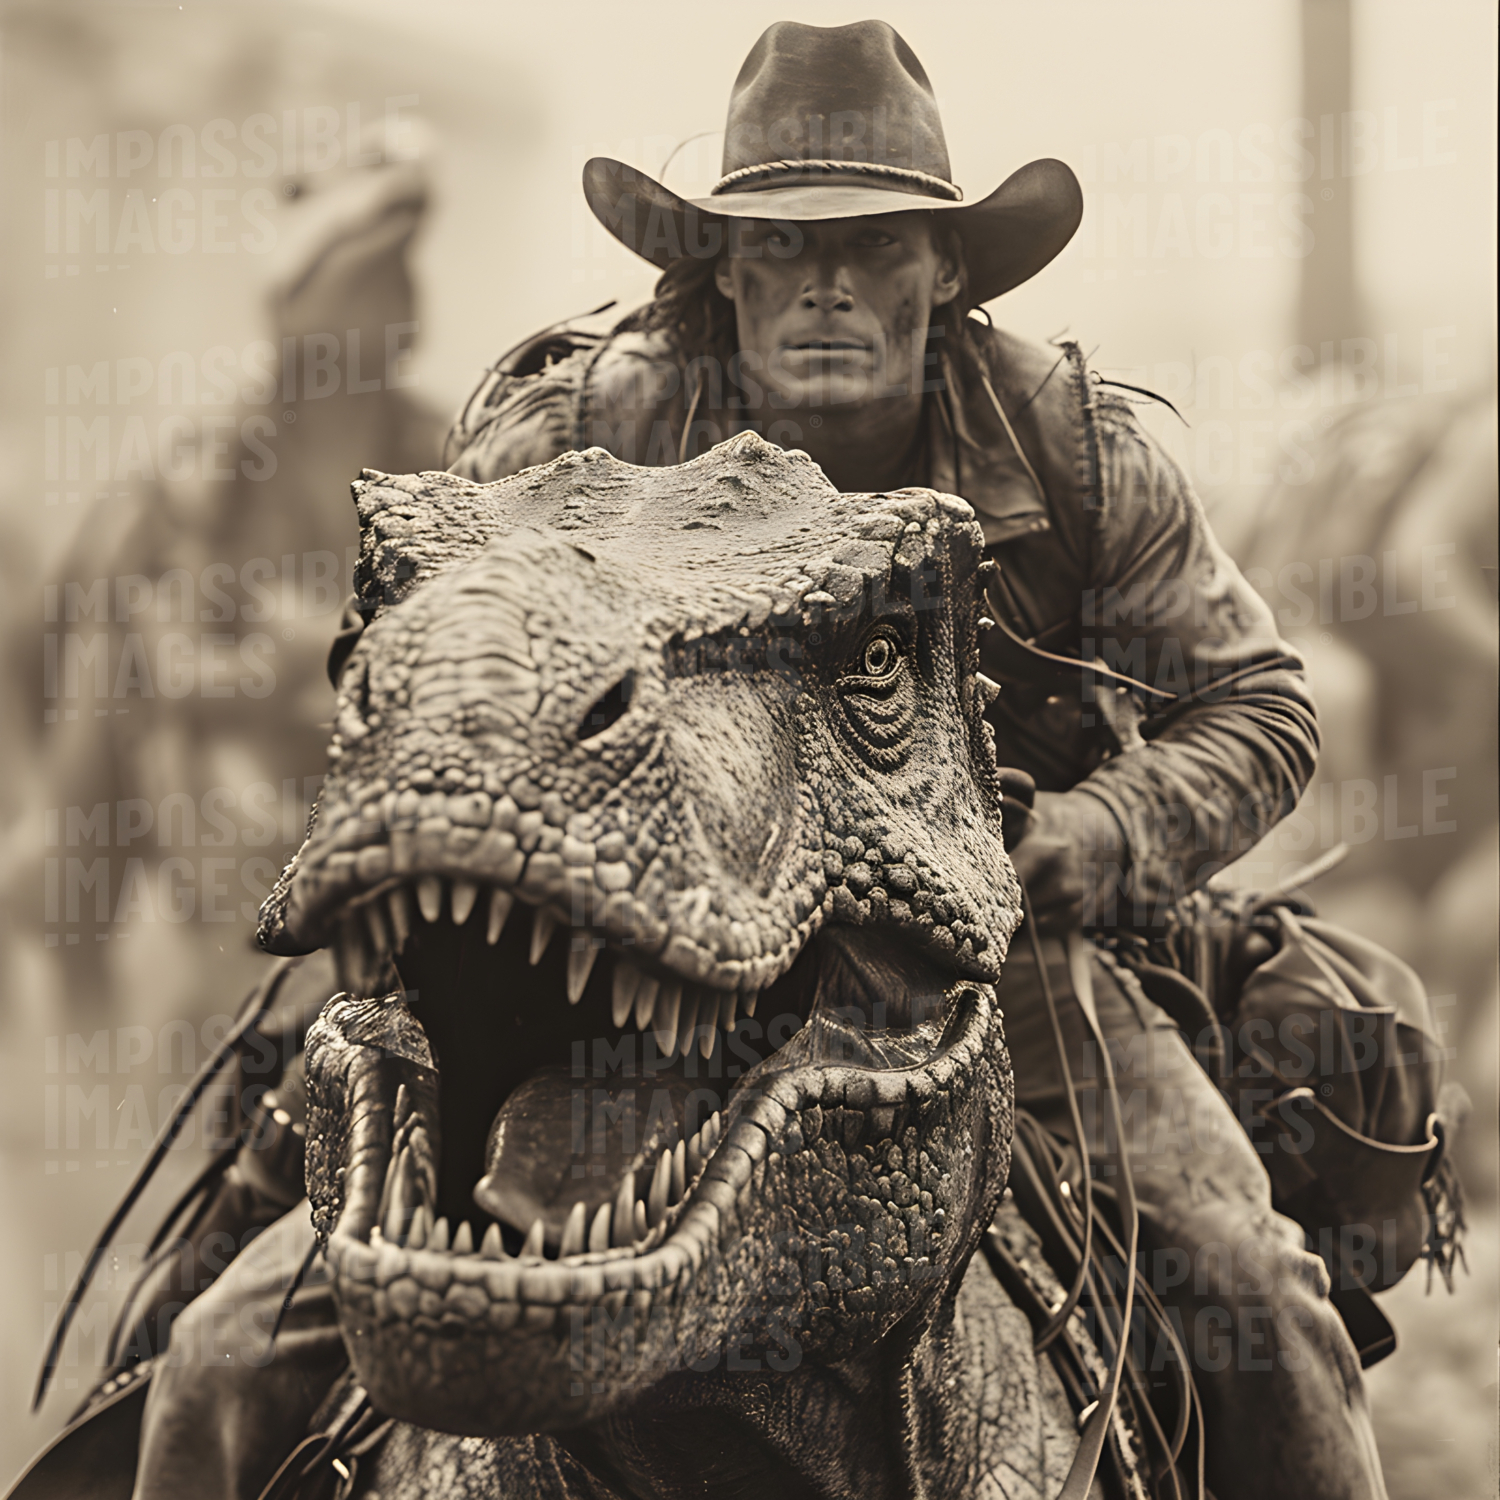 Classic movie scenes from a dinosaur rodeo - 